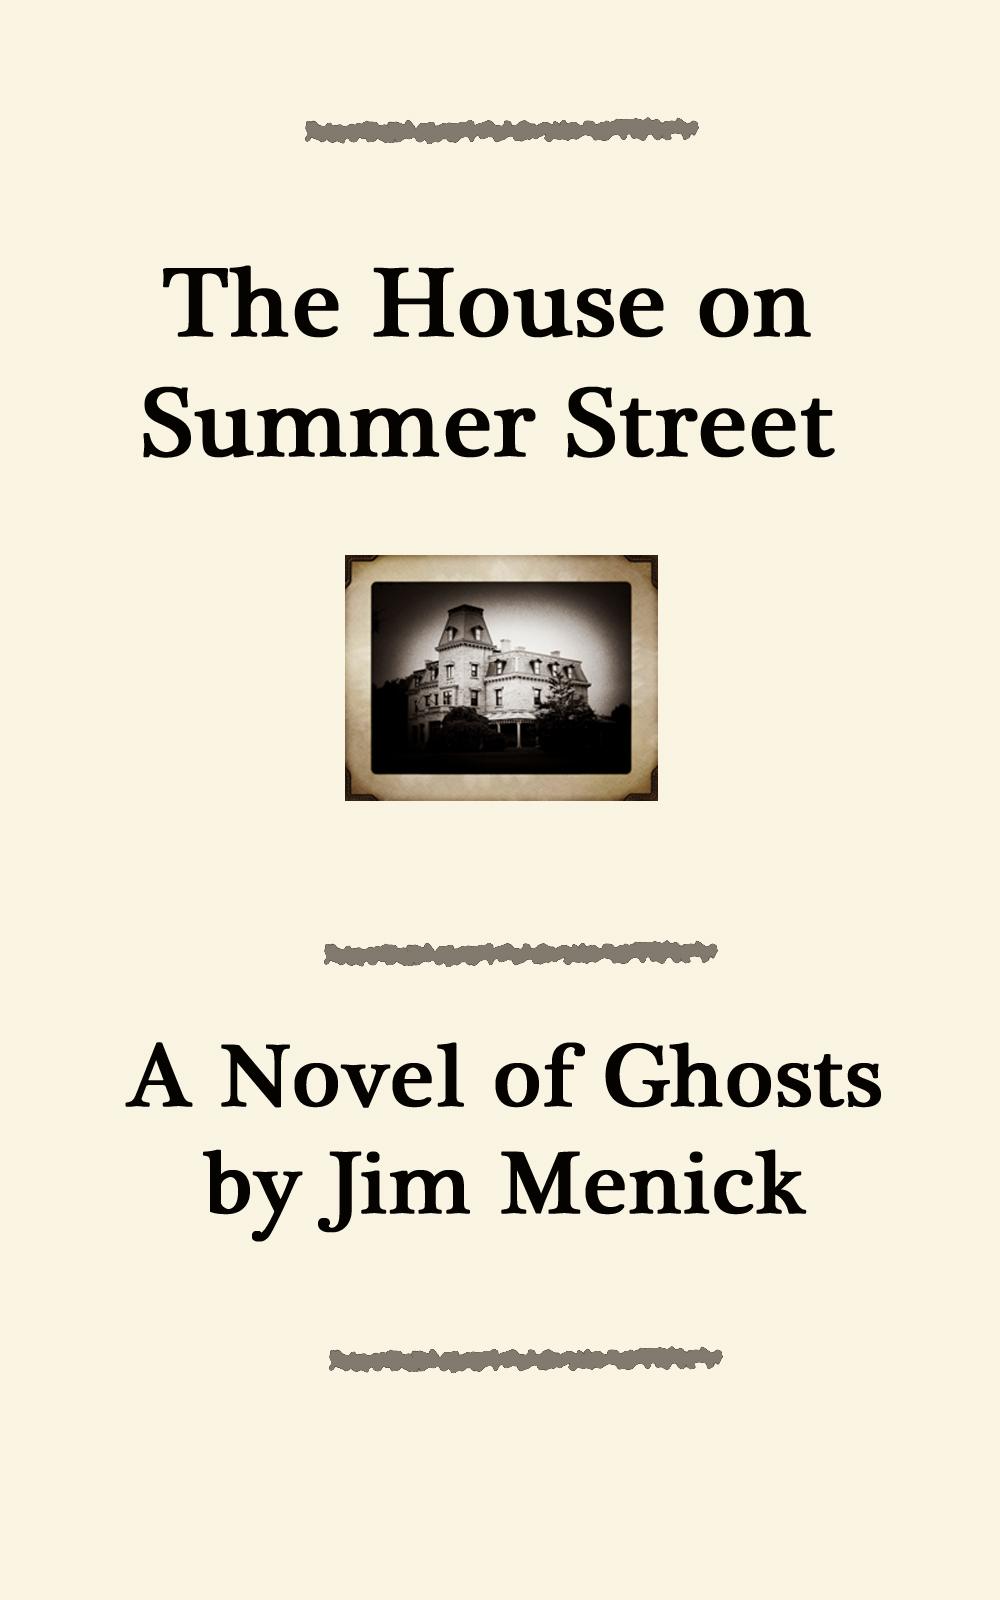 The House on Summer Street by Jim Menick A short sample to put you into the mood for reading the whole thing (and more to the